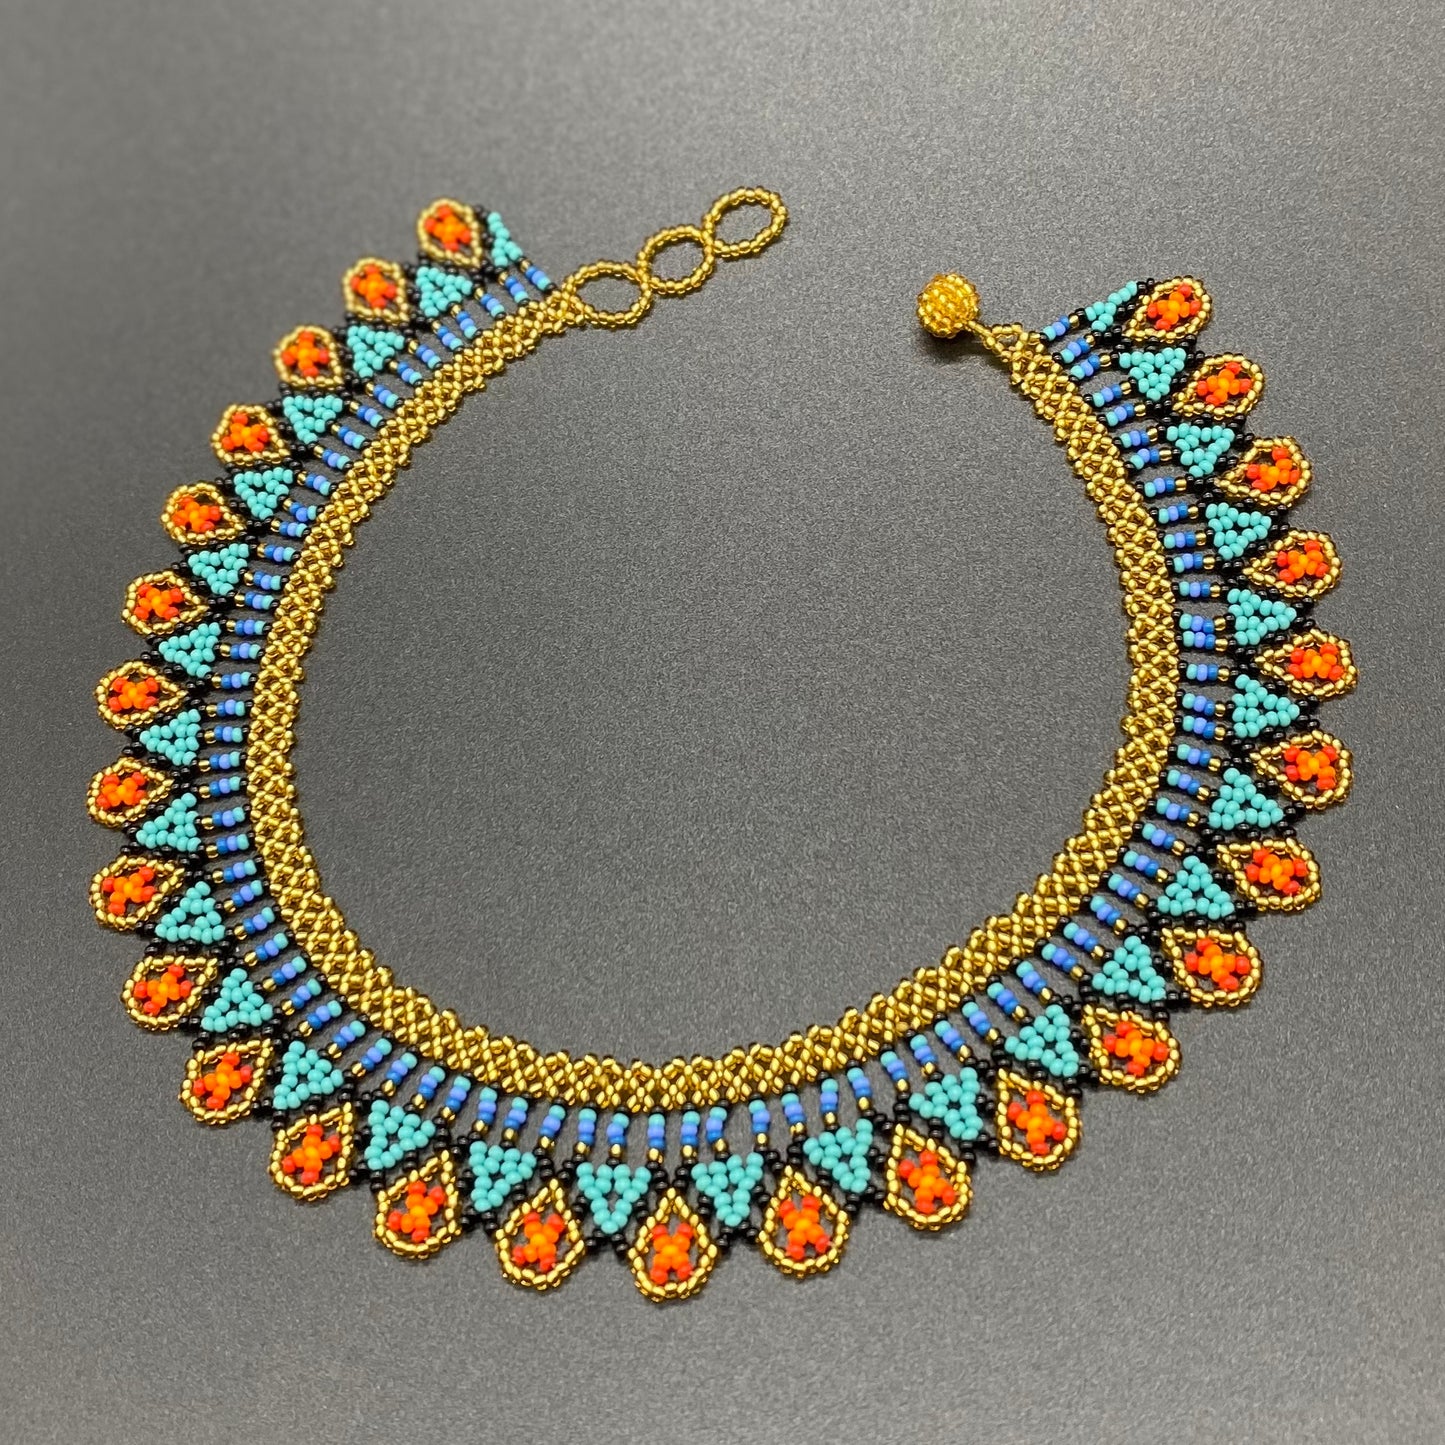 Enlace Beads Collar Necklace / Natale